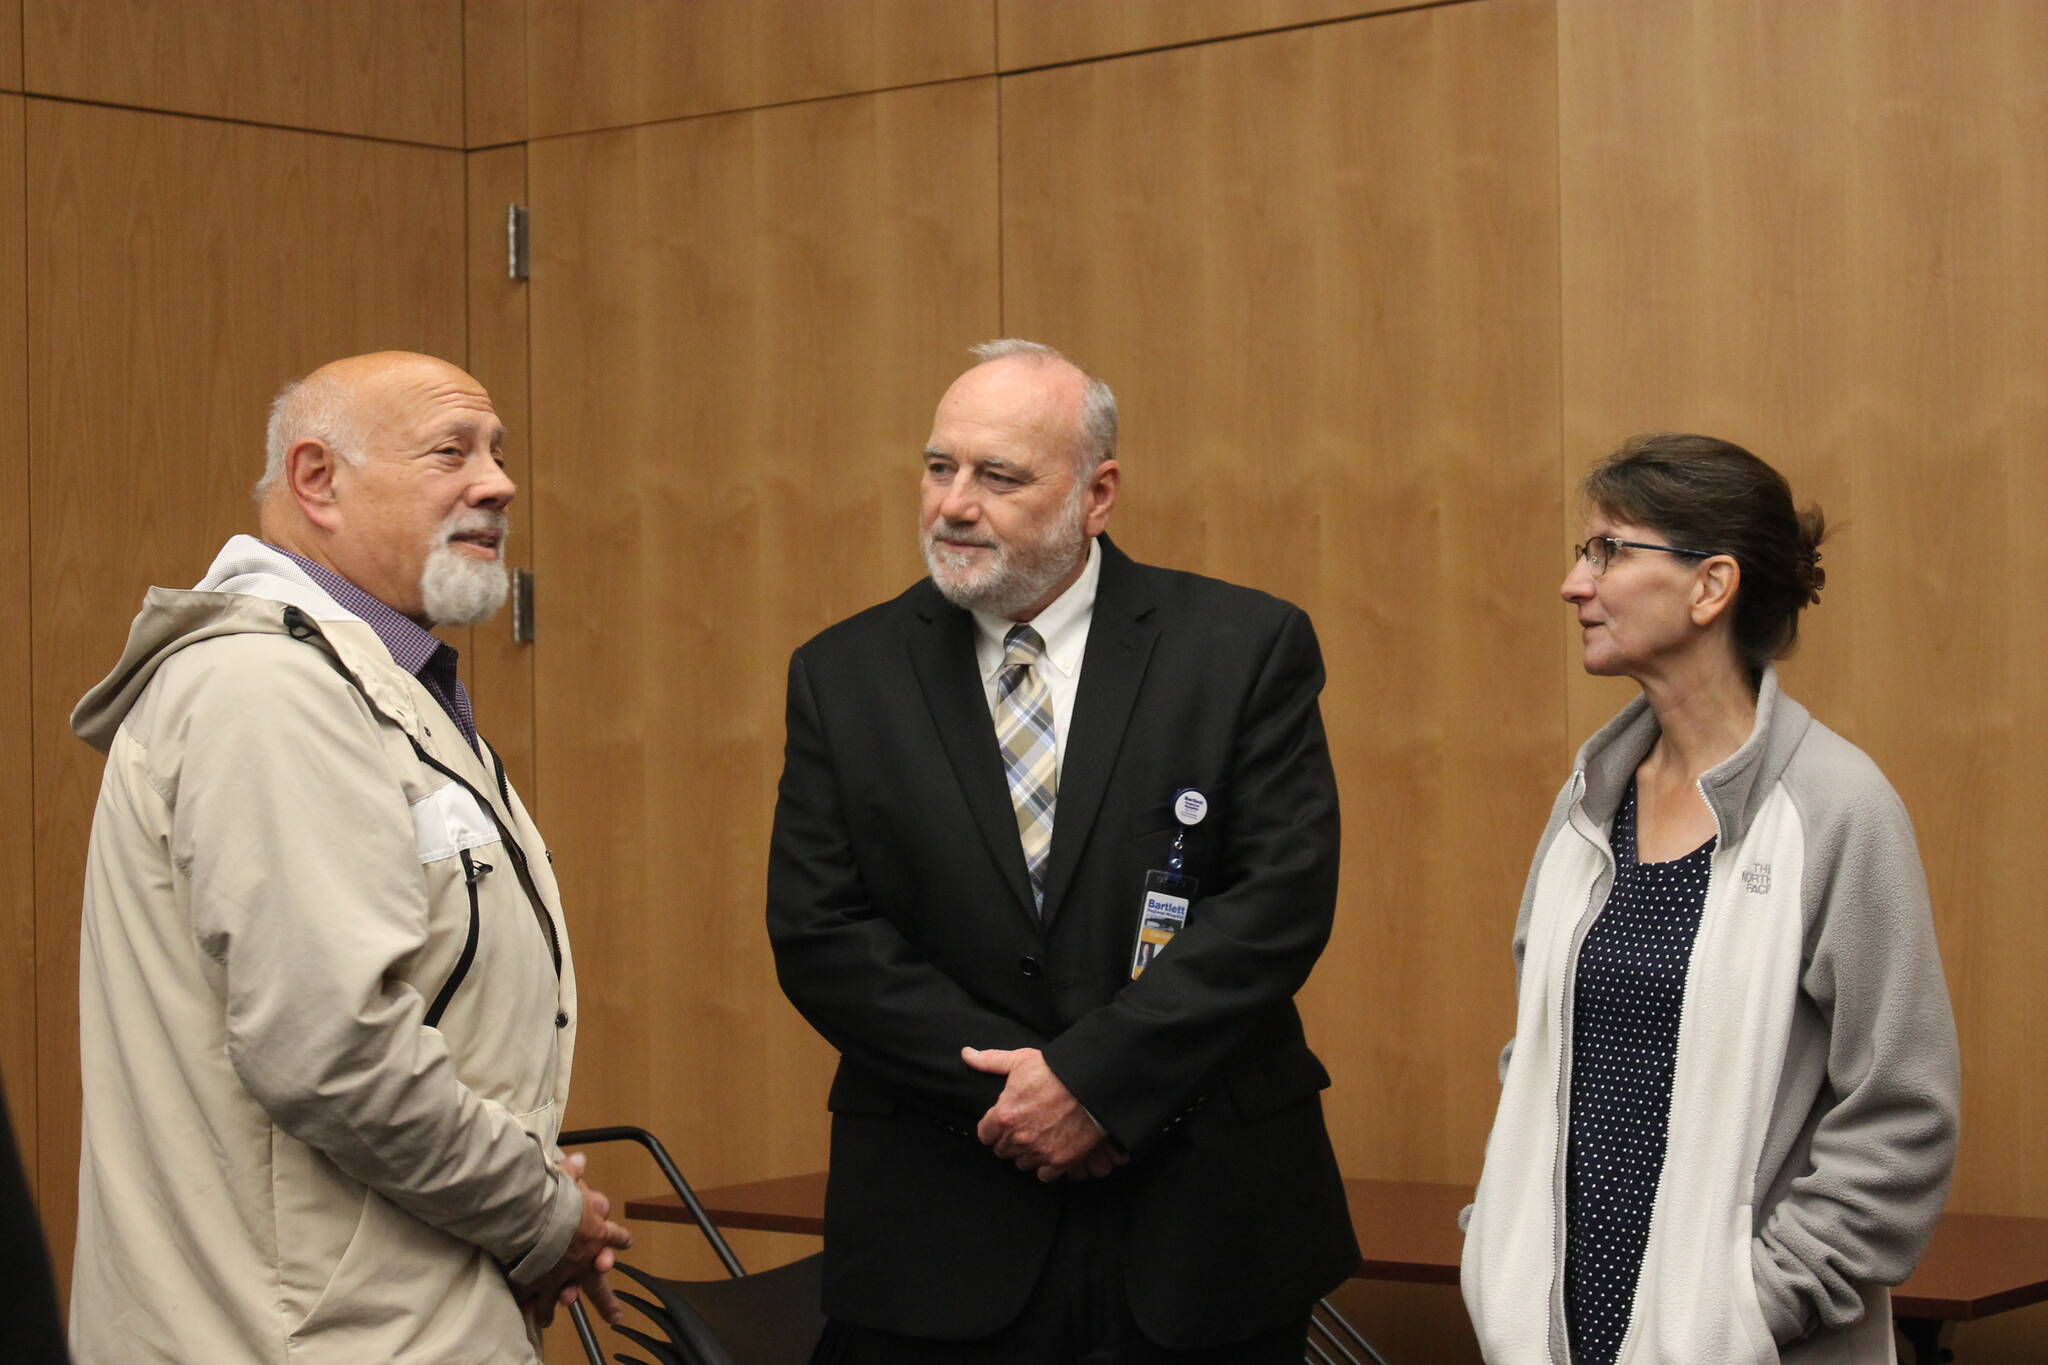 Bartlett Regional Hospital’s CEO finalist Dennis Welsh (center) chats with community members and members of the BRH Board of Directors at his public meet and greet for the potential position. (Clarise Larson / Juneau Empire)